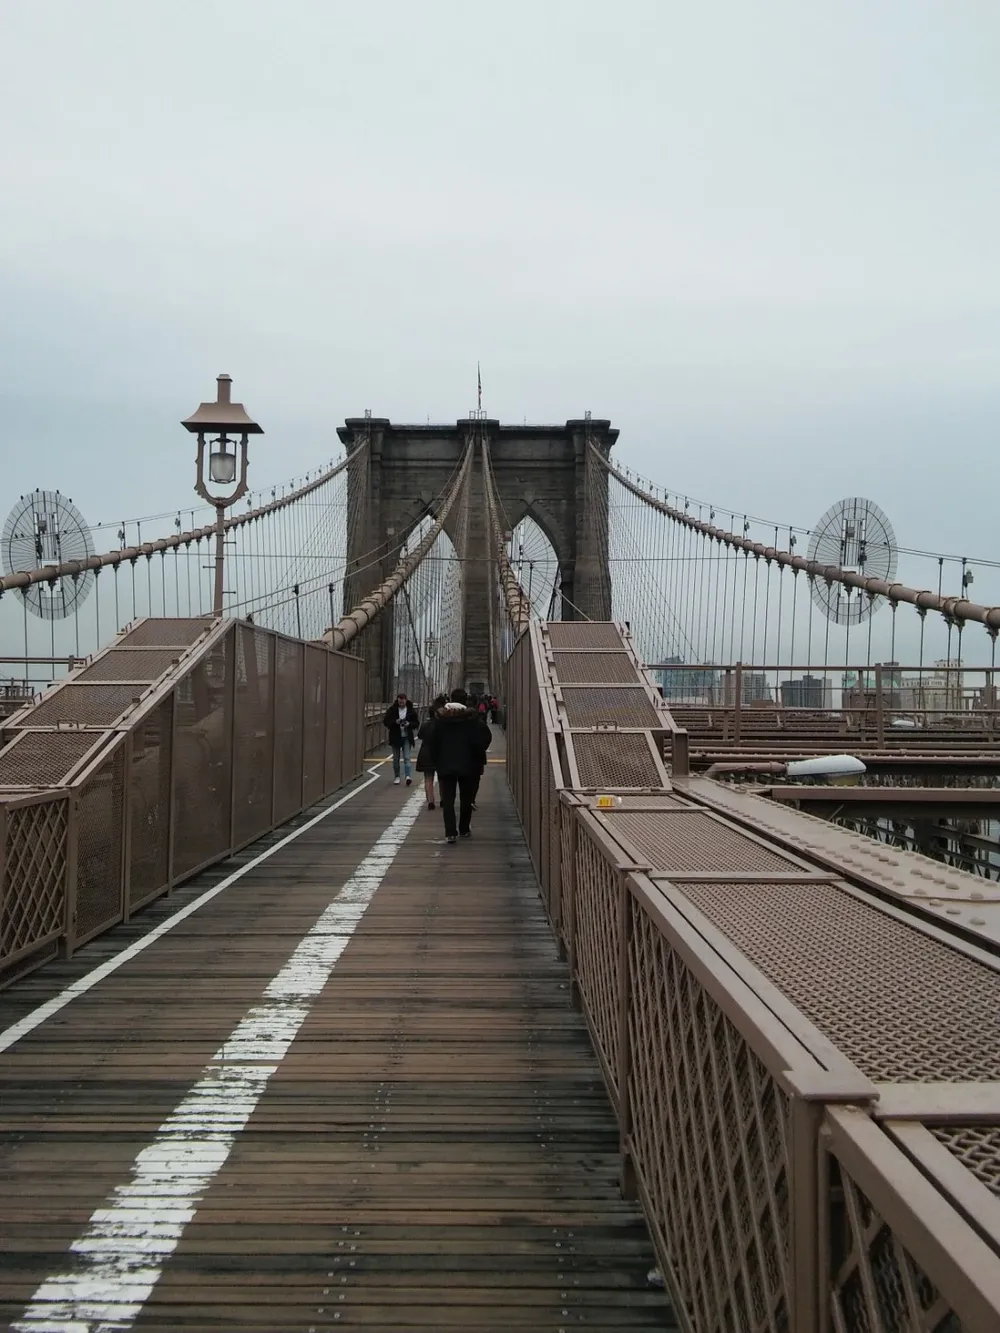 The image shows pedestrians walking on the wooden pedestrian pathway of a large suspension bridge possibly on an overcast day